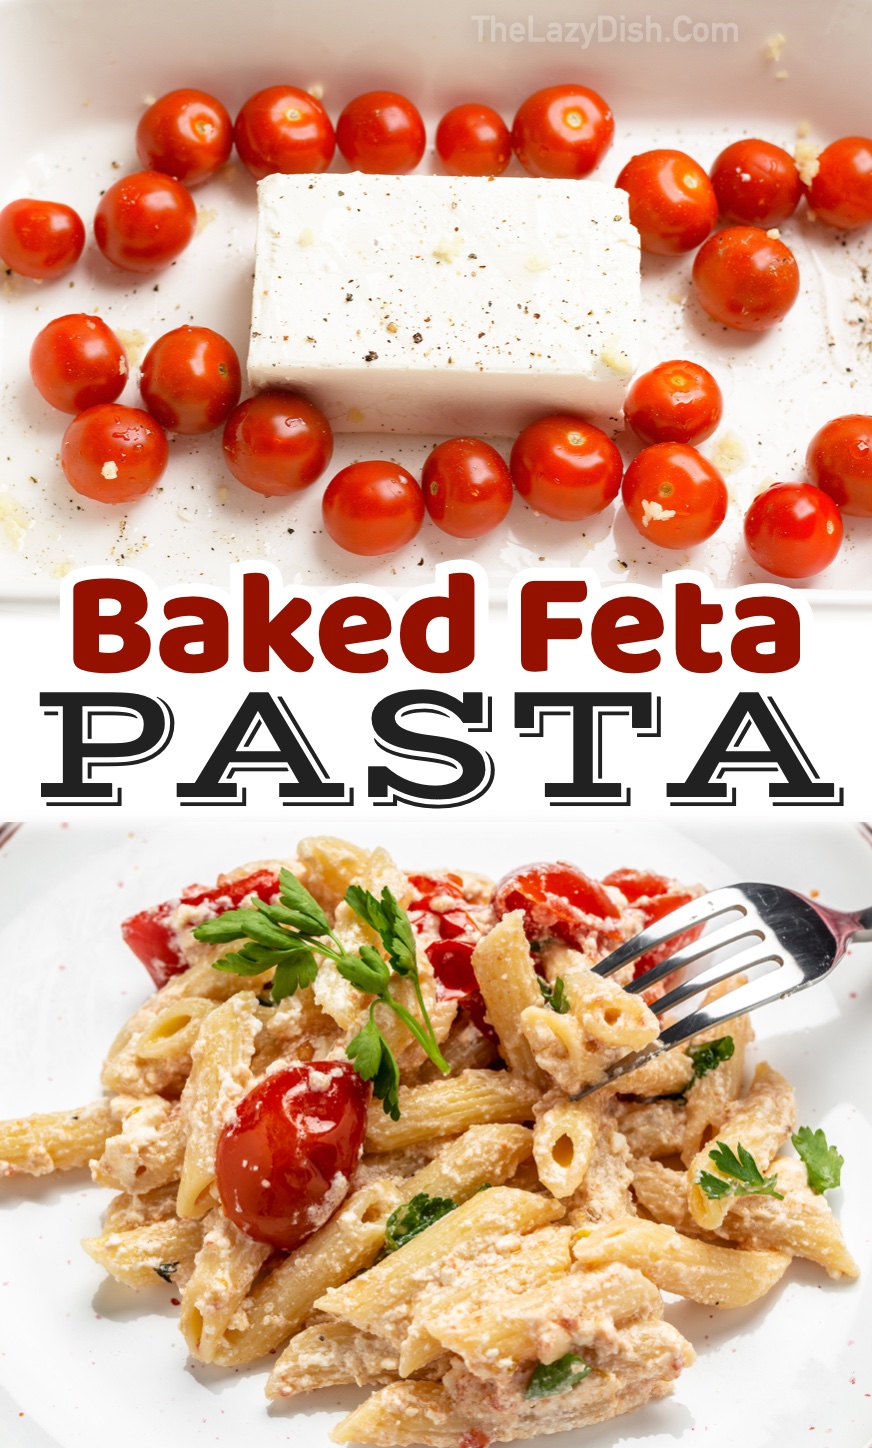 Tik Tok Baked Feta Pasta Recipe | This amazing recipe is made with just a few basic ingredients, yet is packed full of flavor! If you like feta cheese, you're going to love this Italian inspired meal. It's fun to make in your oven with a block of feta and cherry tomatoes. Toss it with your favorite pasta! Your family is going to love it. Even my picky eaters gobble it up.